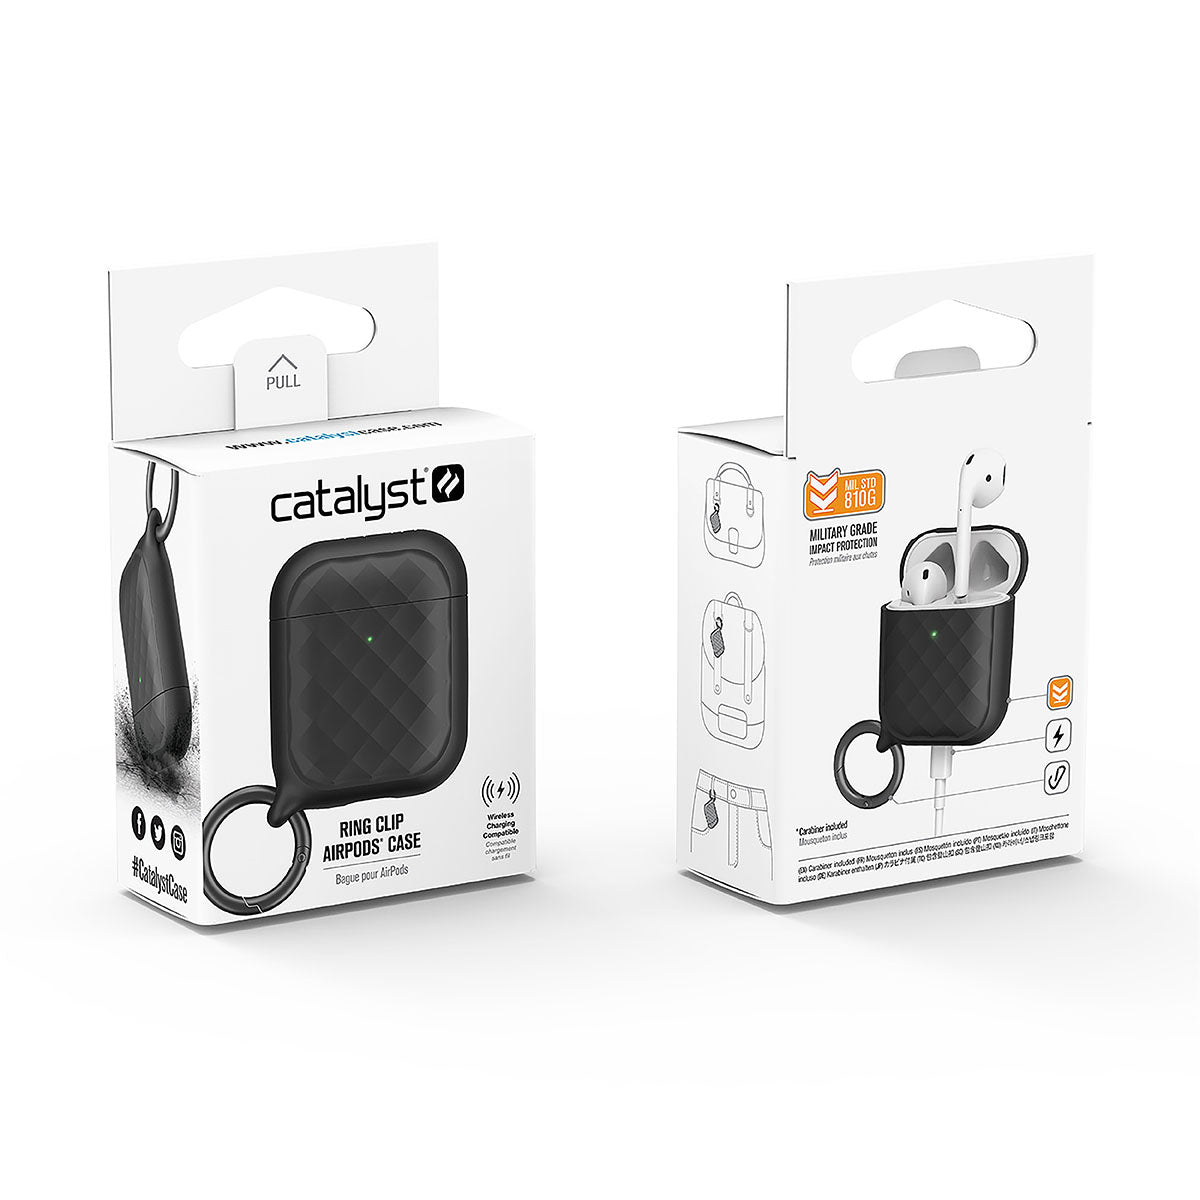 Catalyst airpods gen2/1 case ring clip carabiner showing the front and back of the case